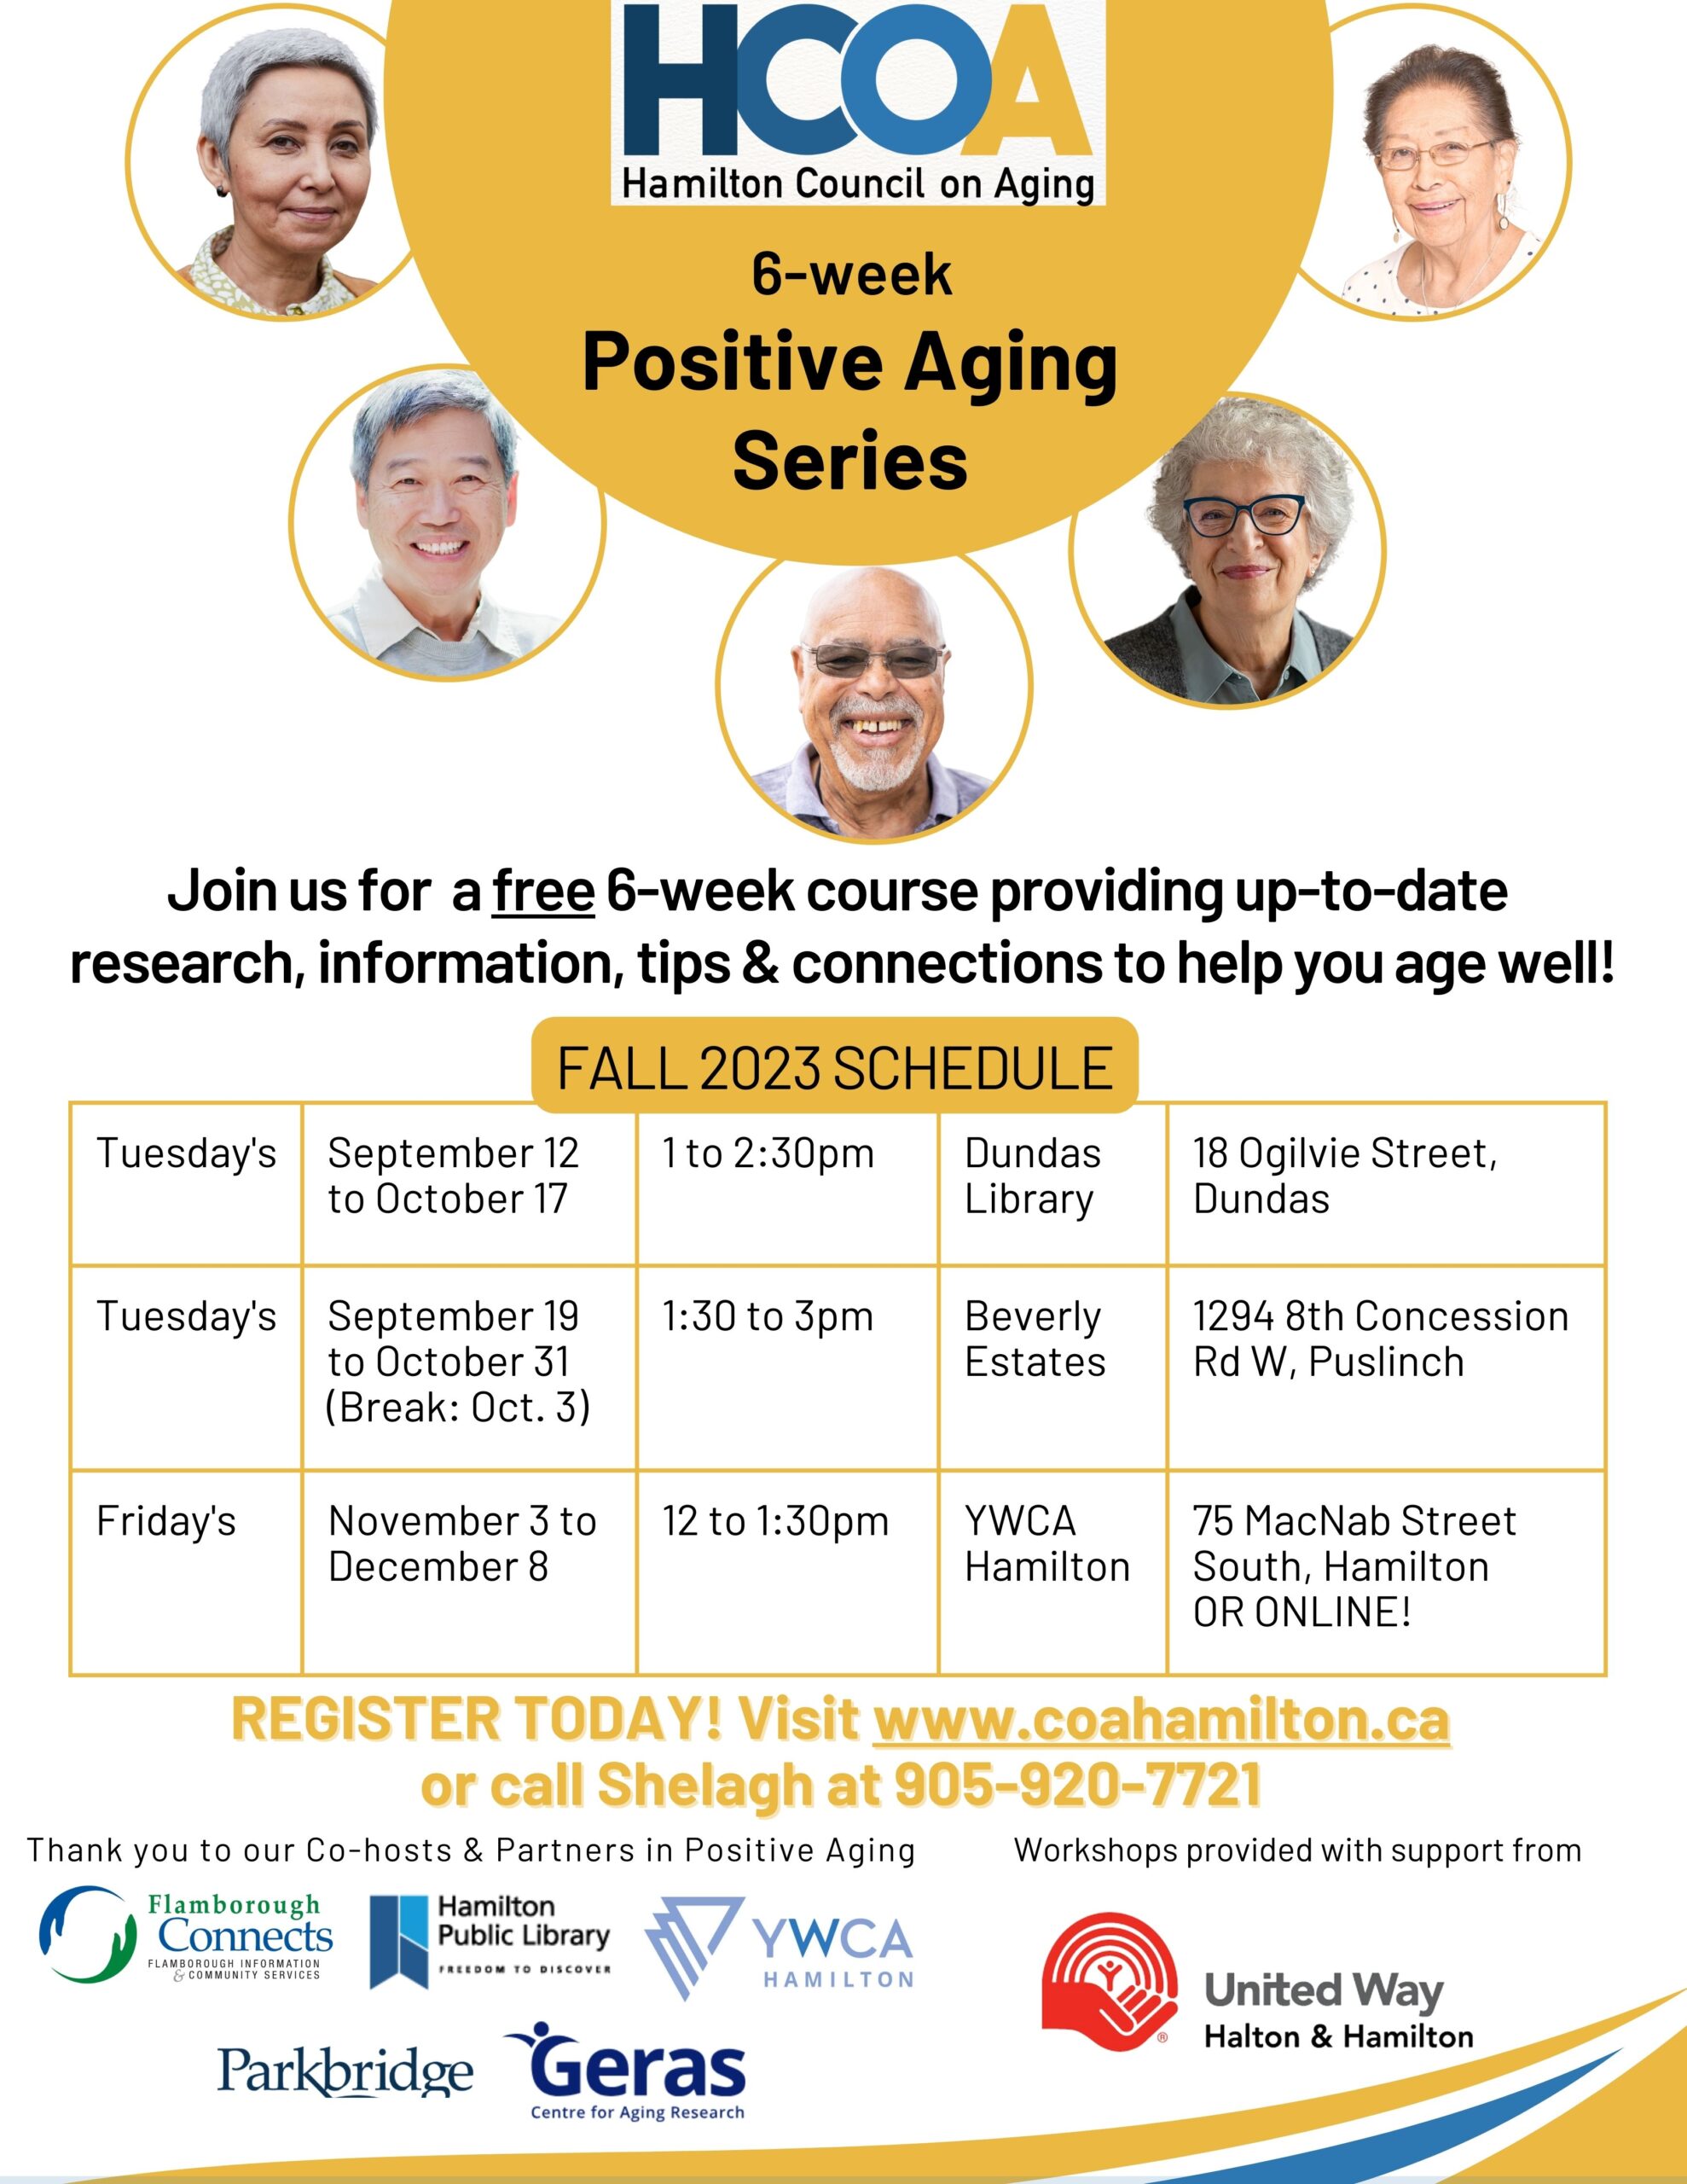 Call 905-920-7721 to register for a free 6-part positive aging series in Hamilton